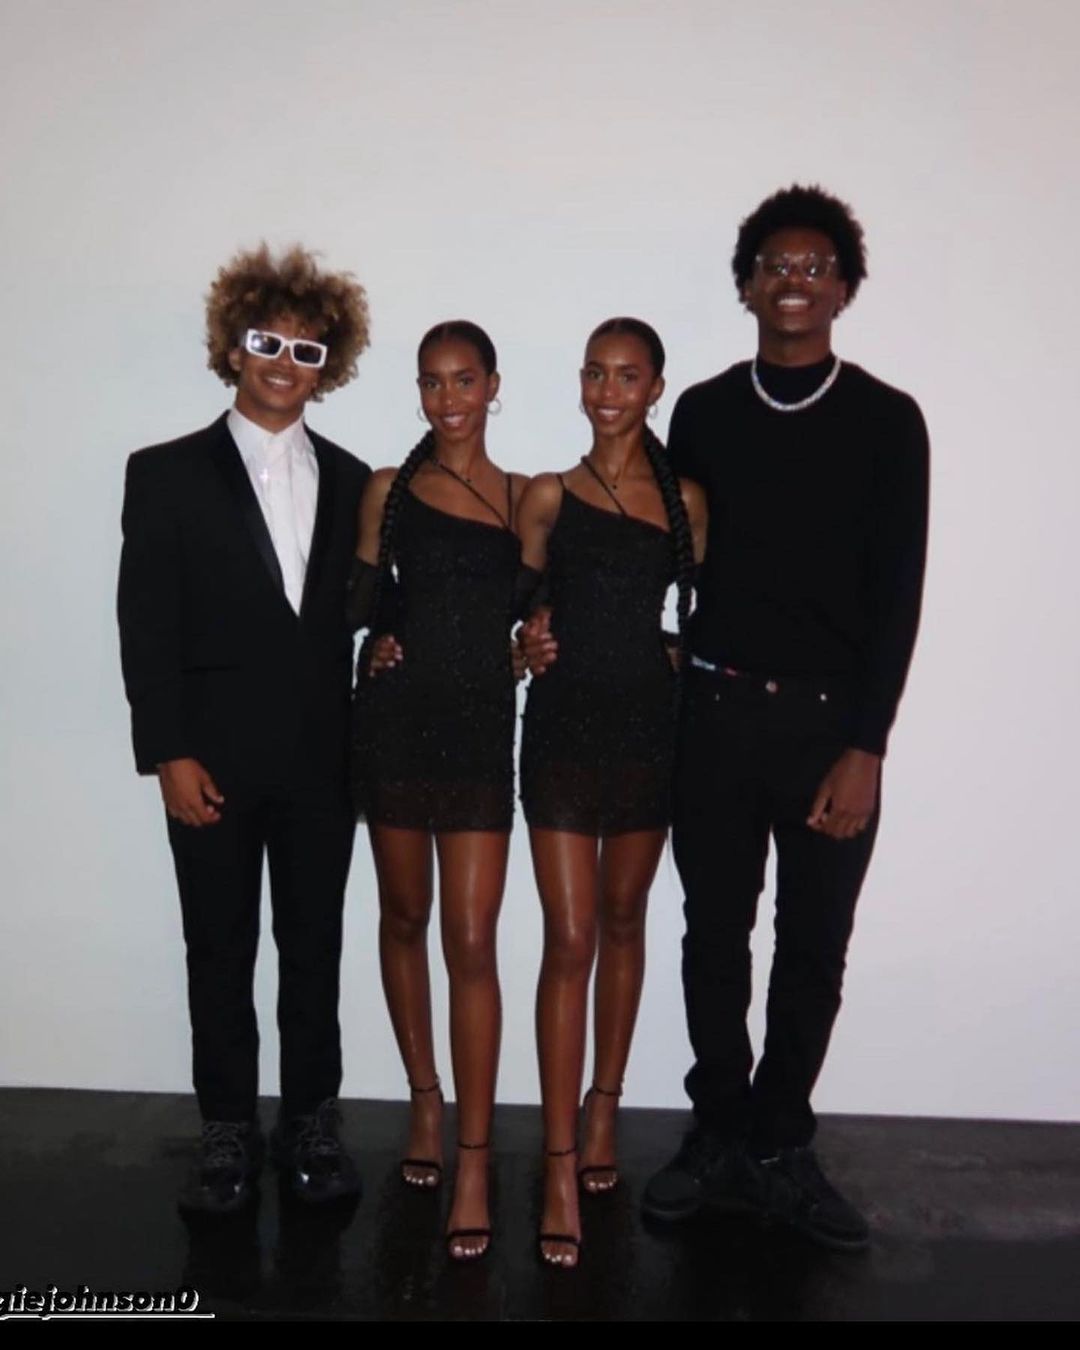 ICYMI: The Combs Twins Went To Homecoming With LeBron James’ Son And Their School’s Star Quarterback